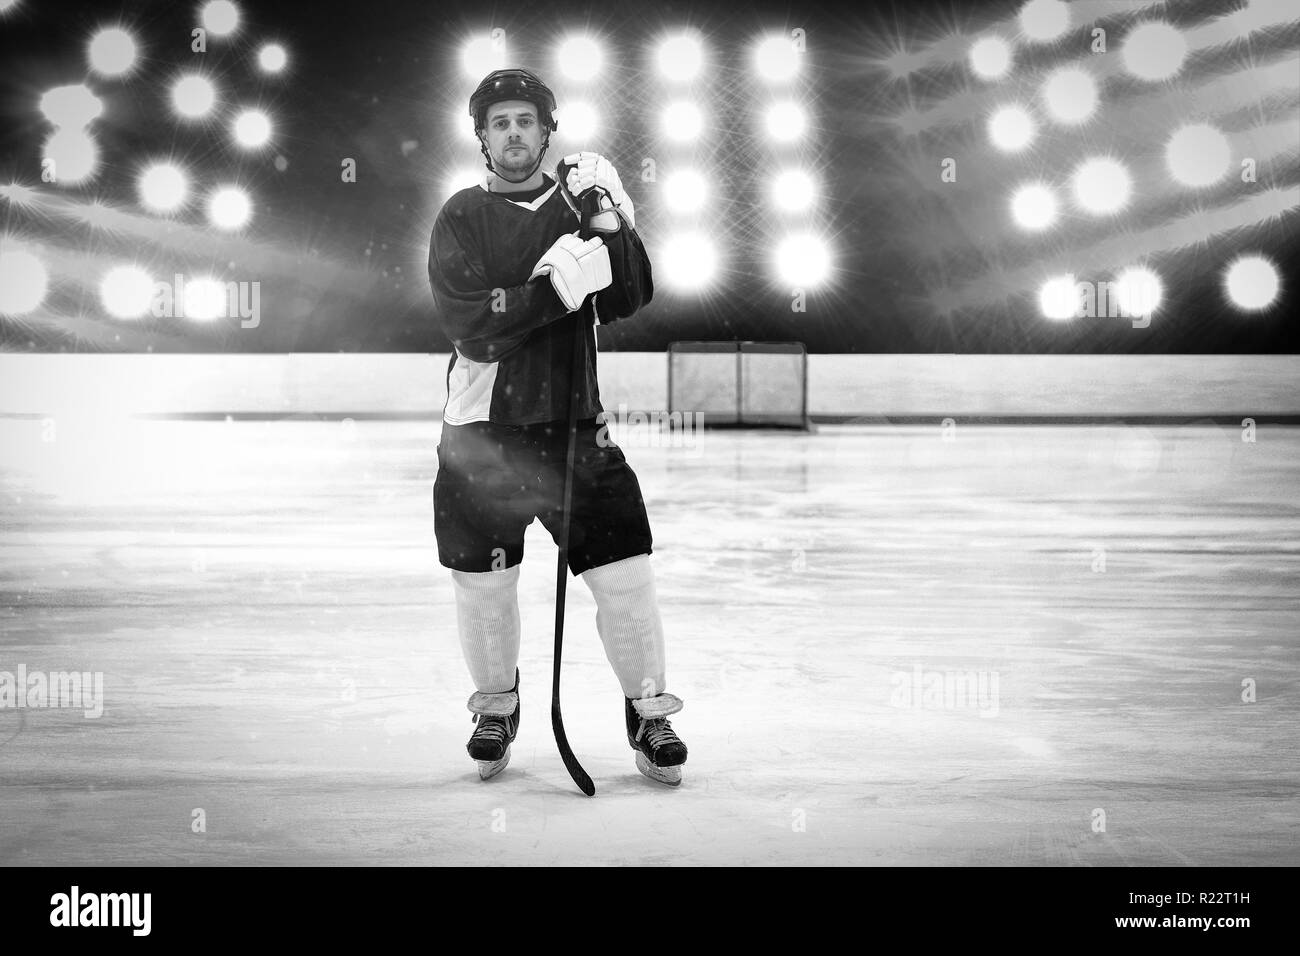 Composite image of hockey player with hockey stick standing on rink Stock Photo